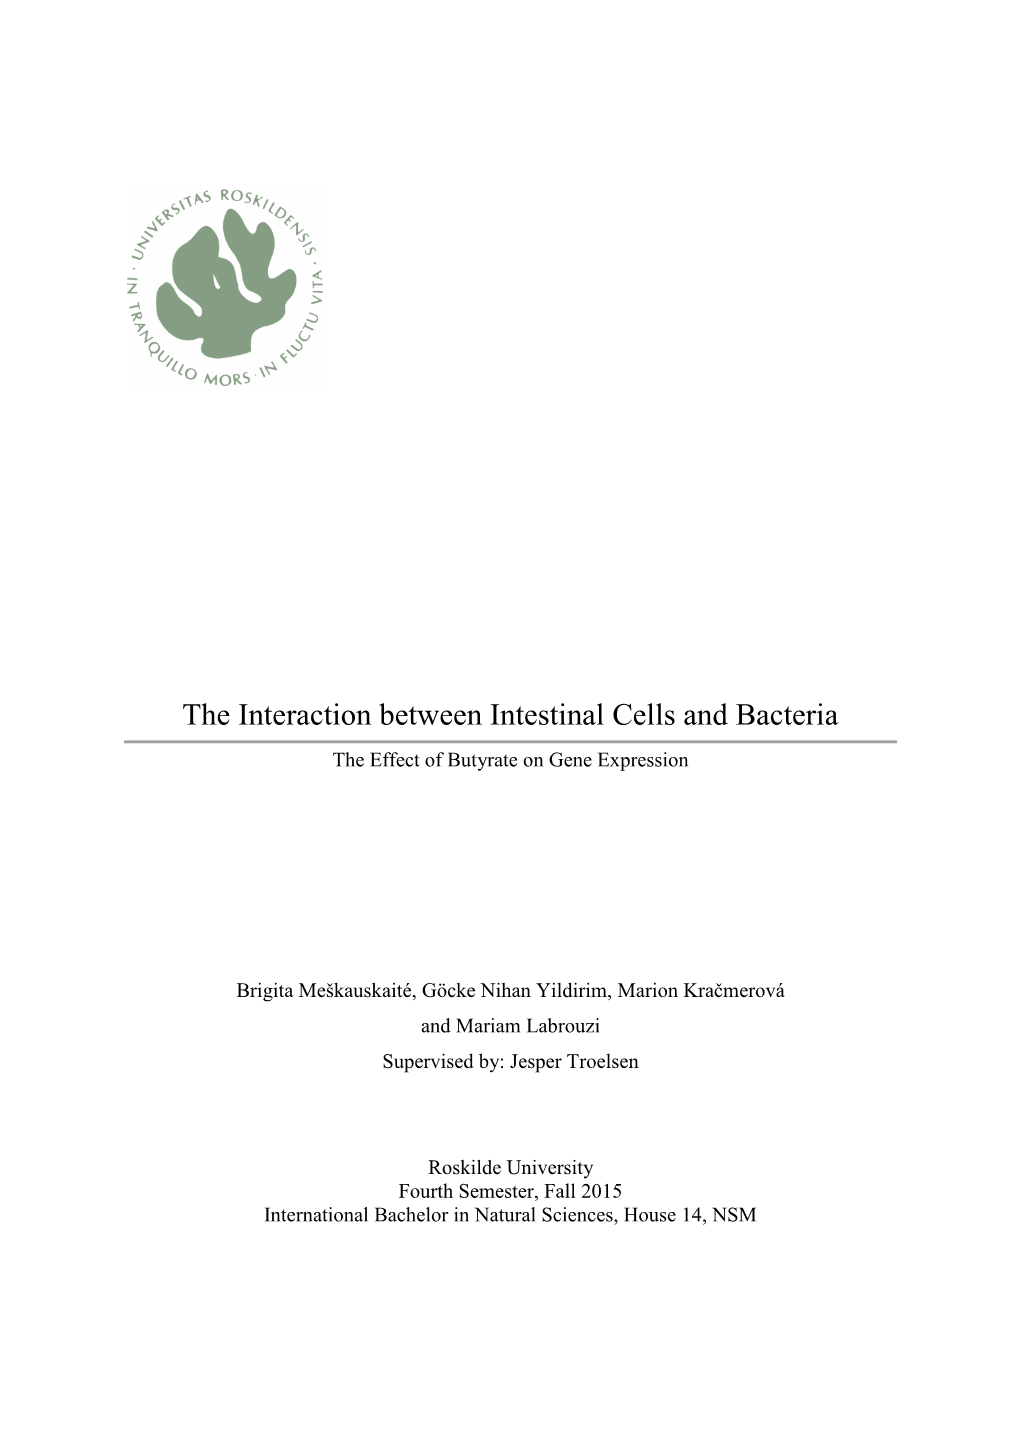 The Interaction Between Intestinal Cells and Bacteria